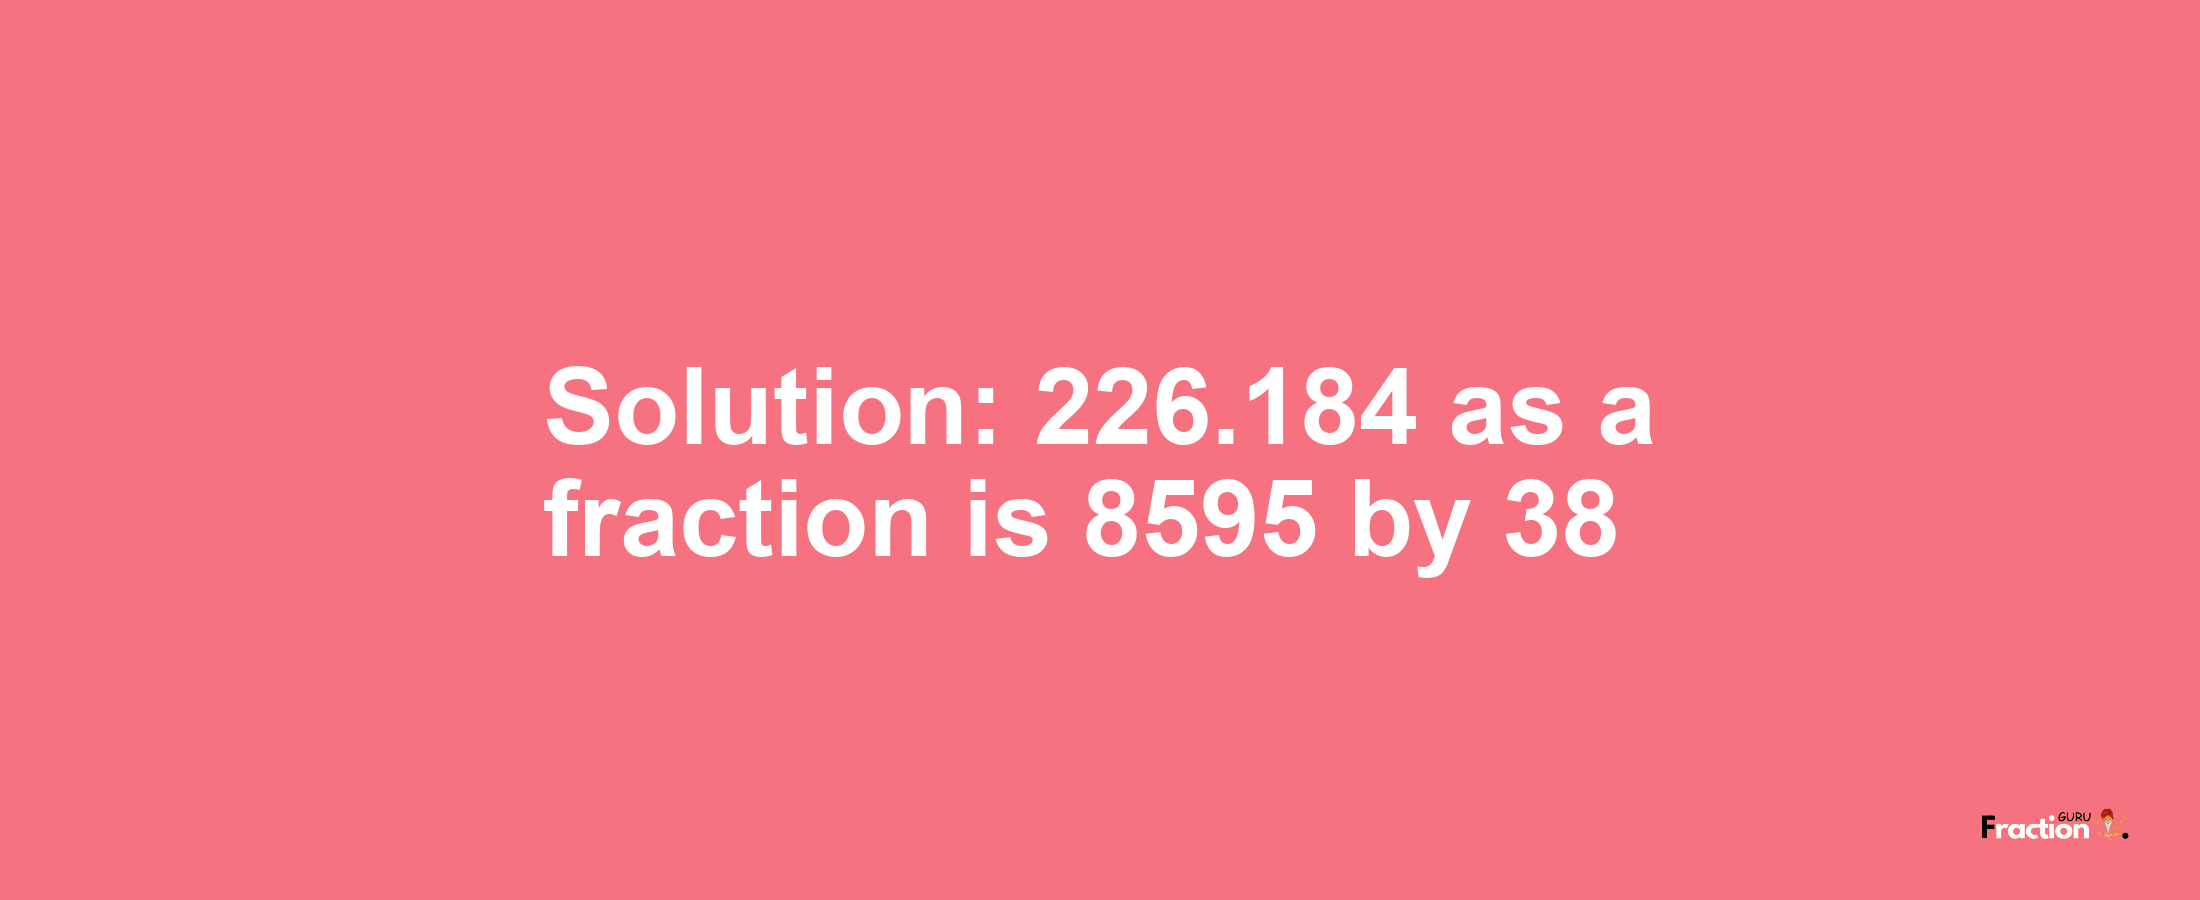 Solution:226.184 as a fraction is 8595/38